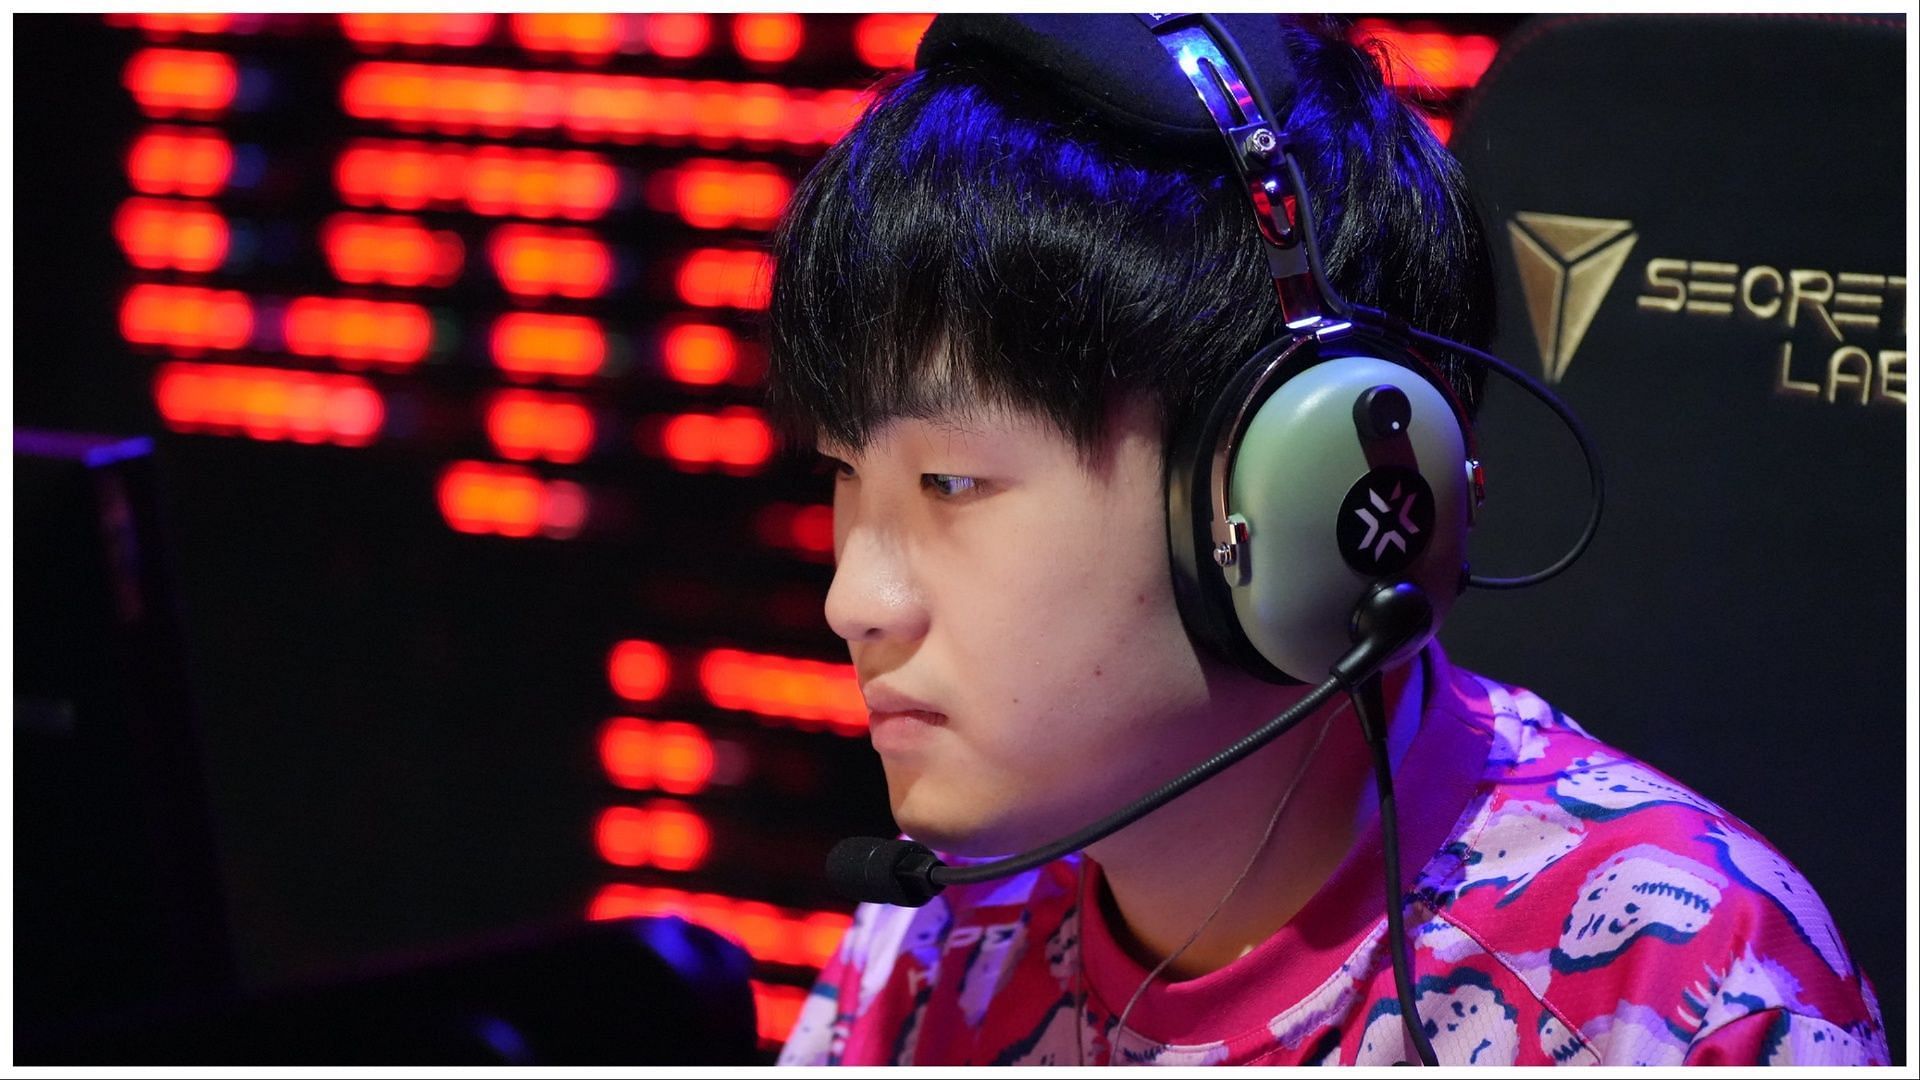 Jing Wie Jang as seen while competing for PRX (Image via Liquipedia)